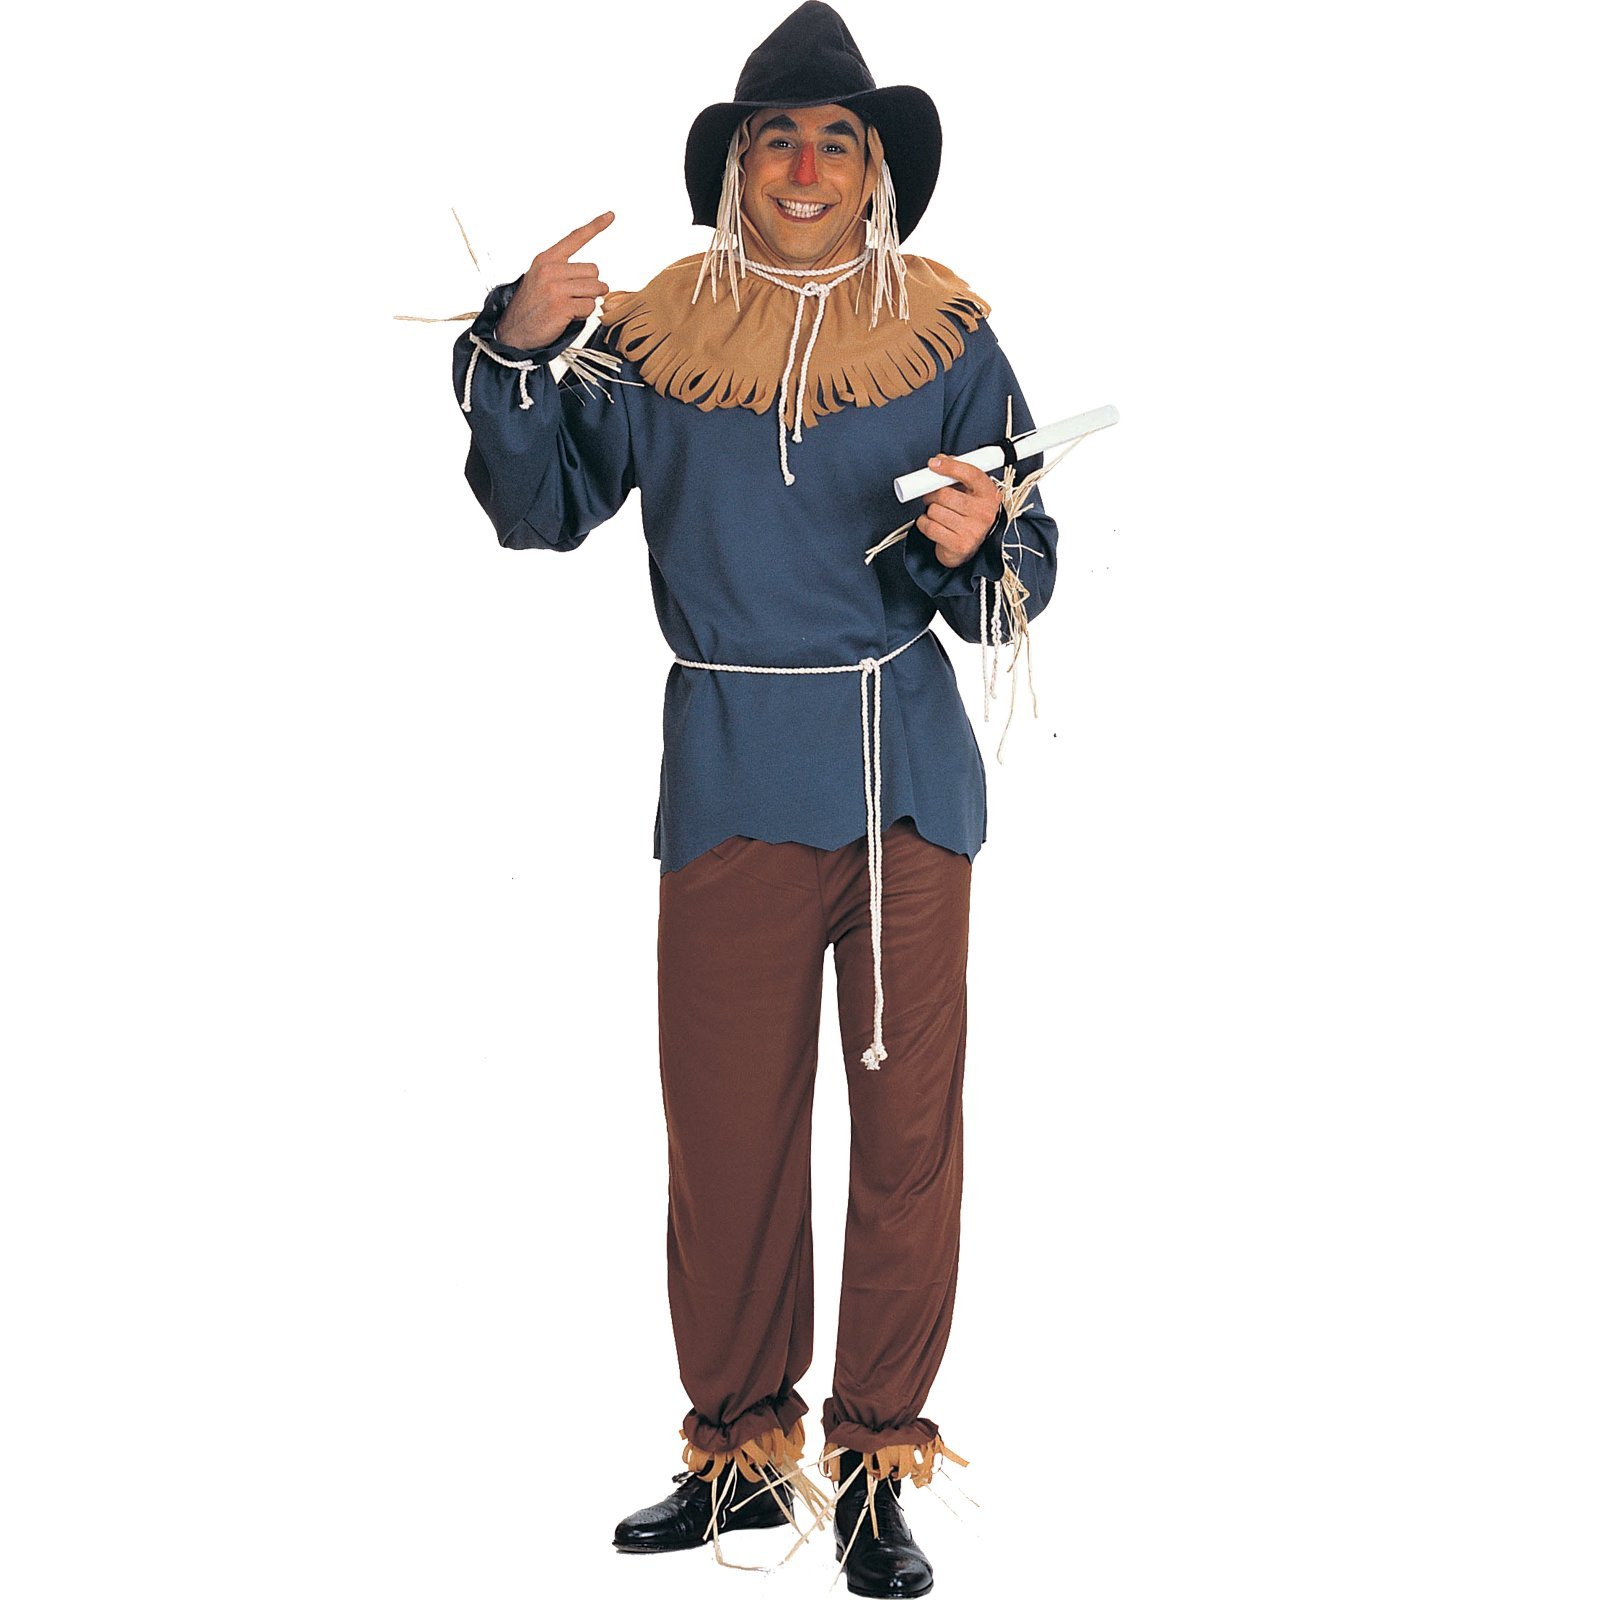 The Wizard of Oz - Scarecrow Adult Plus Costume